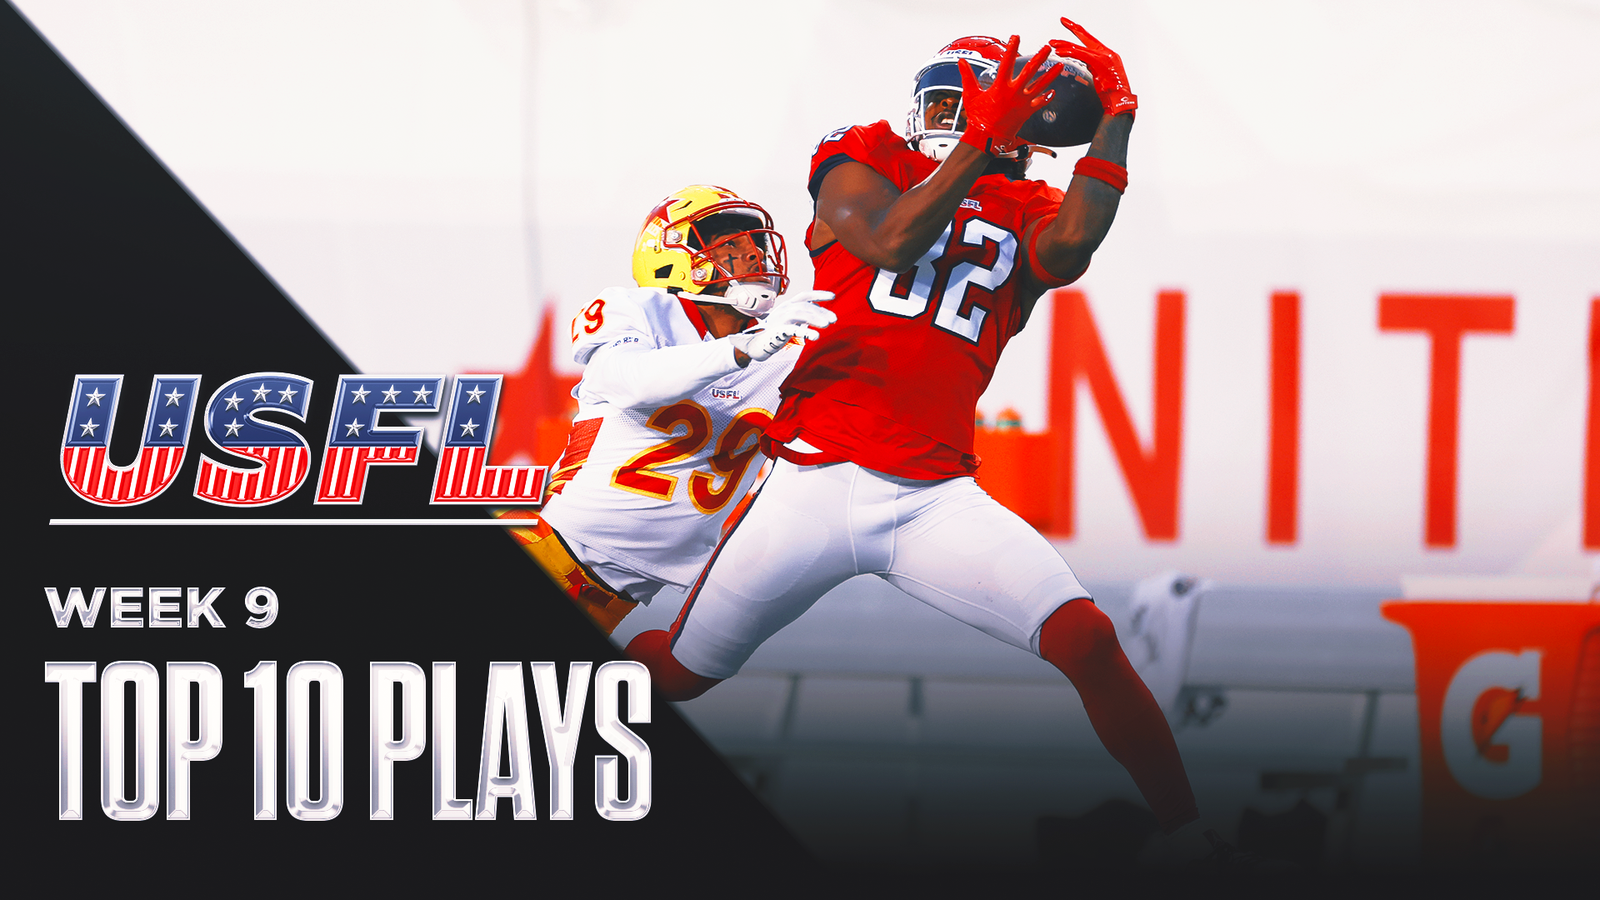 The USFL's Top 10 plays from Week 9